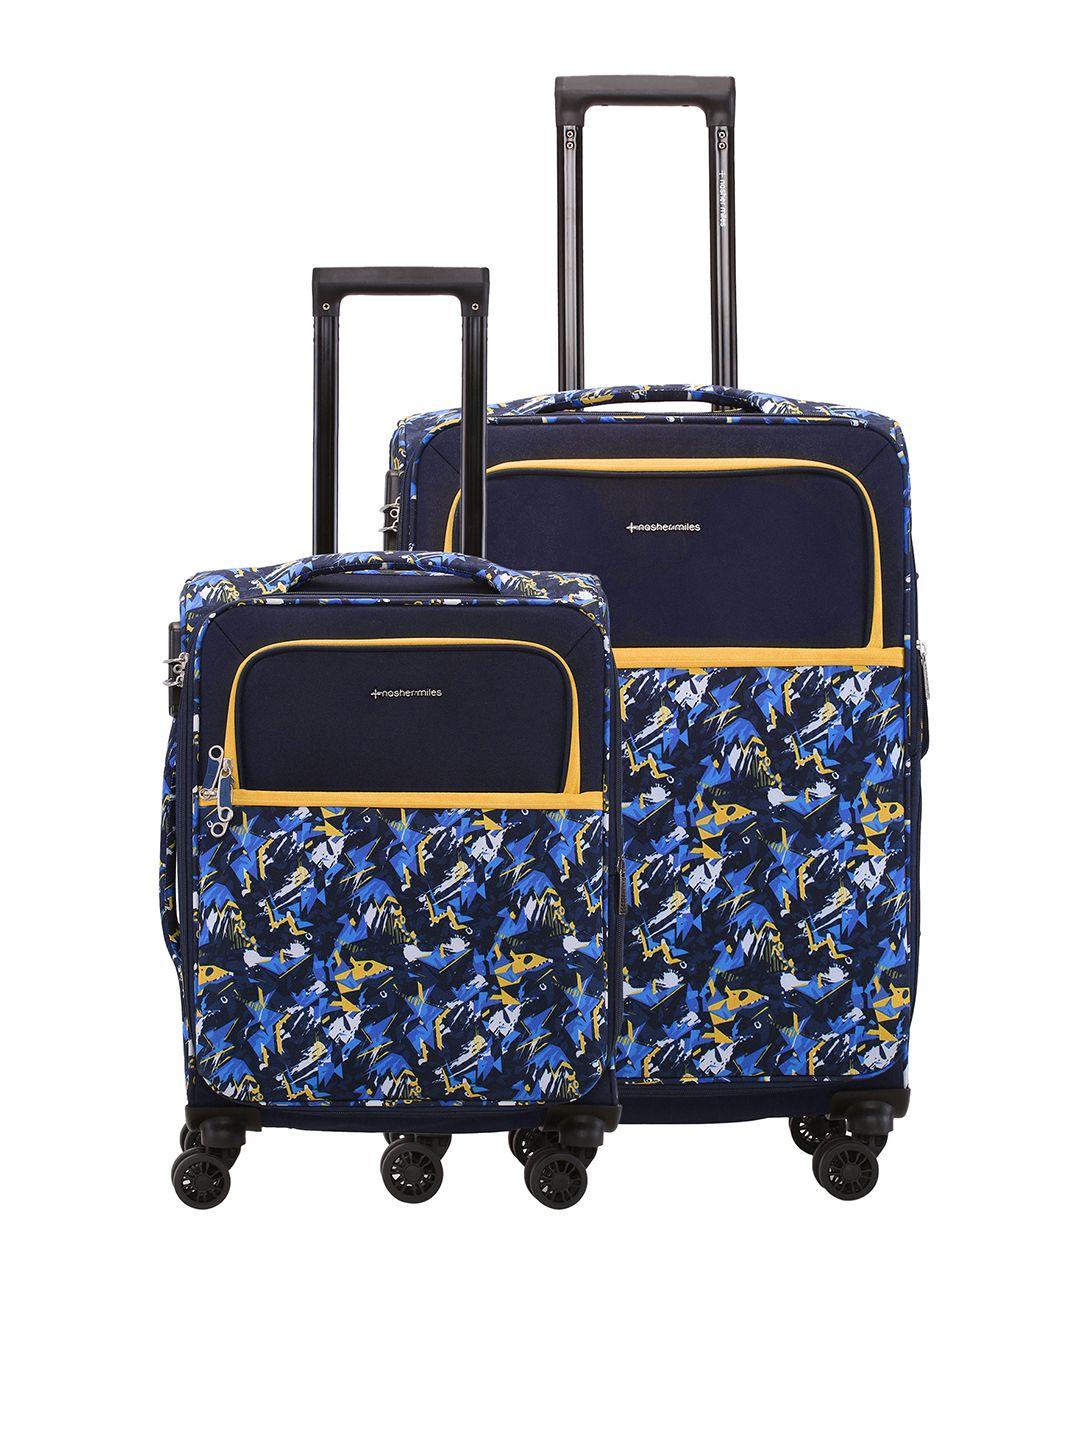 nasher miles unisex set of 2 water resistant soft-sided trolley suitcase